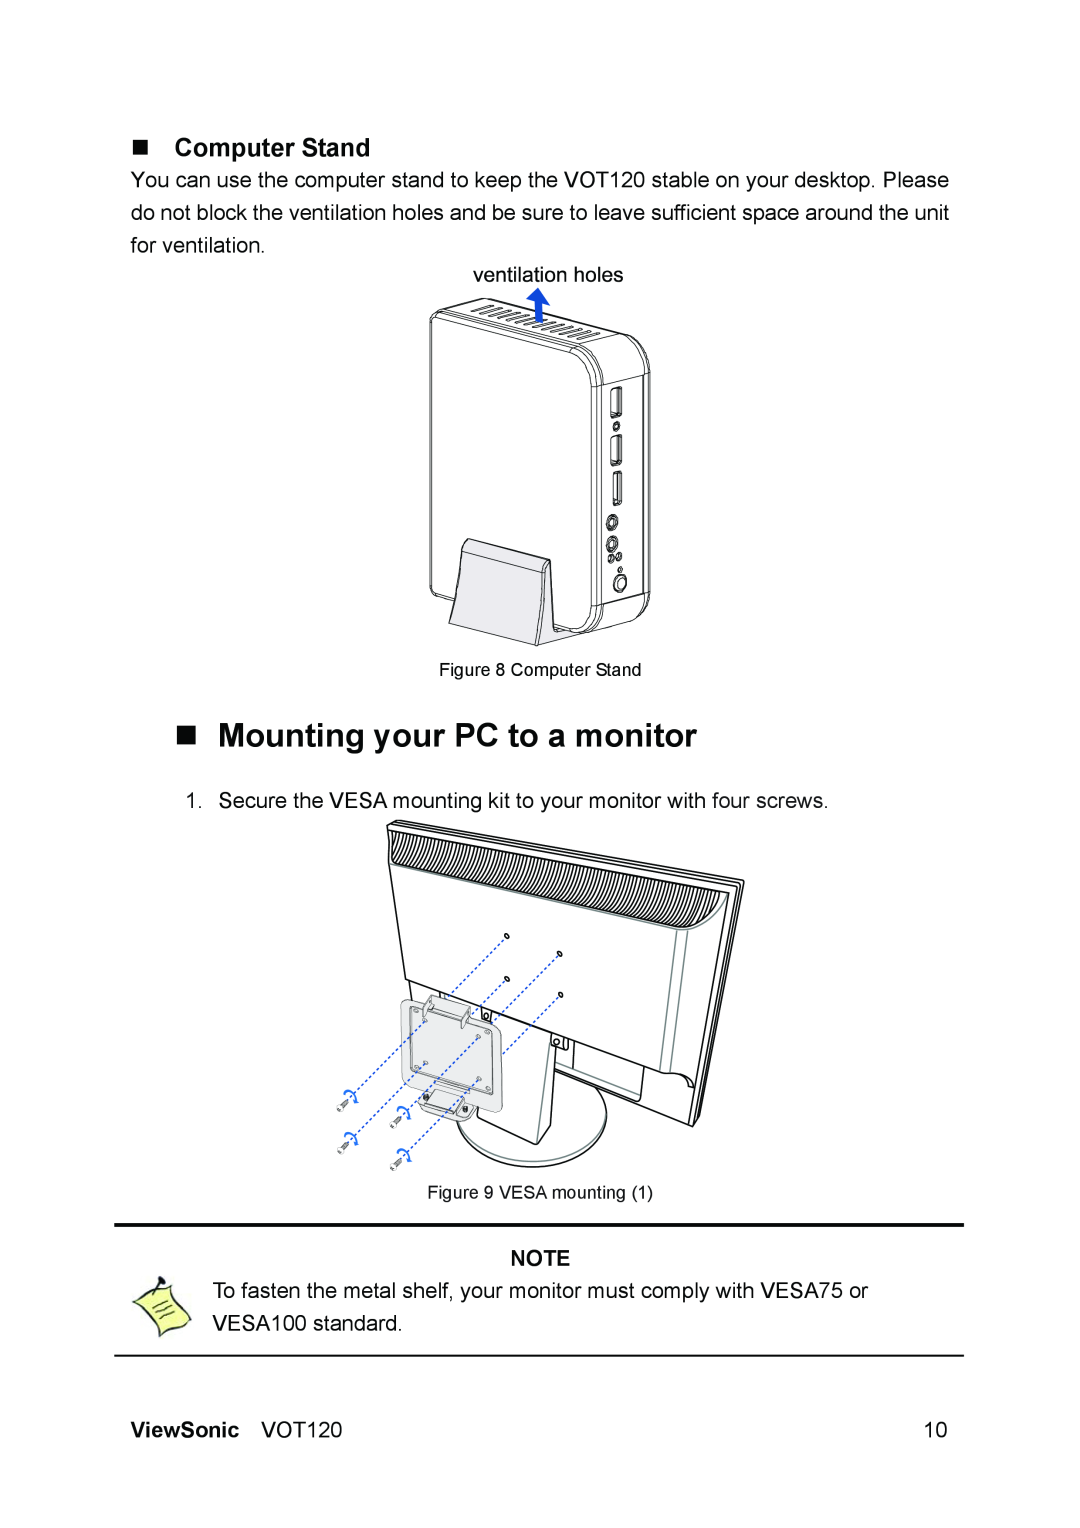 ViewSonic VS12869 manual „ Mounting your PC to a monitor, „ Computer Stand, ViewSonic VOT120 